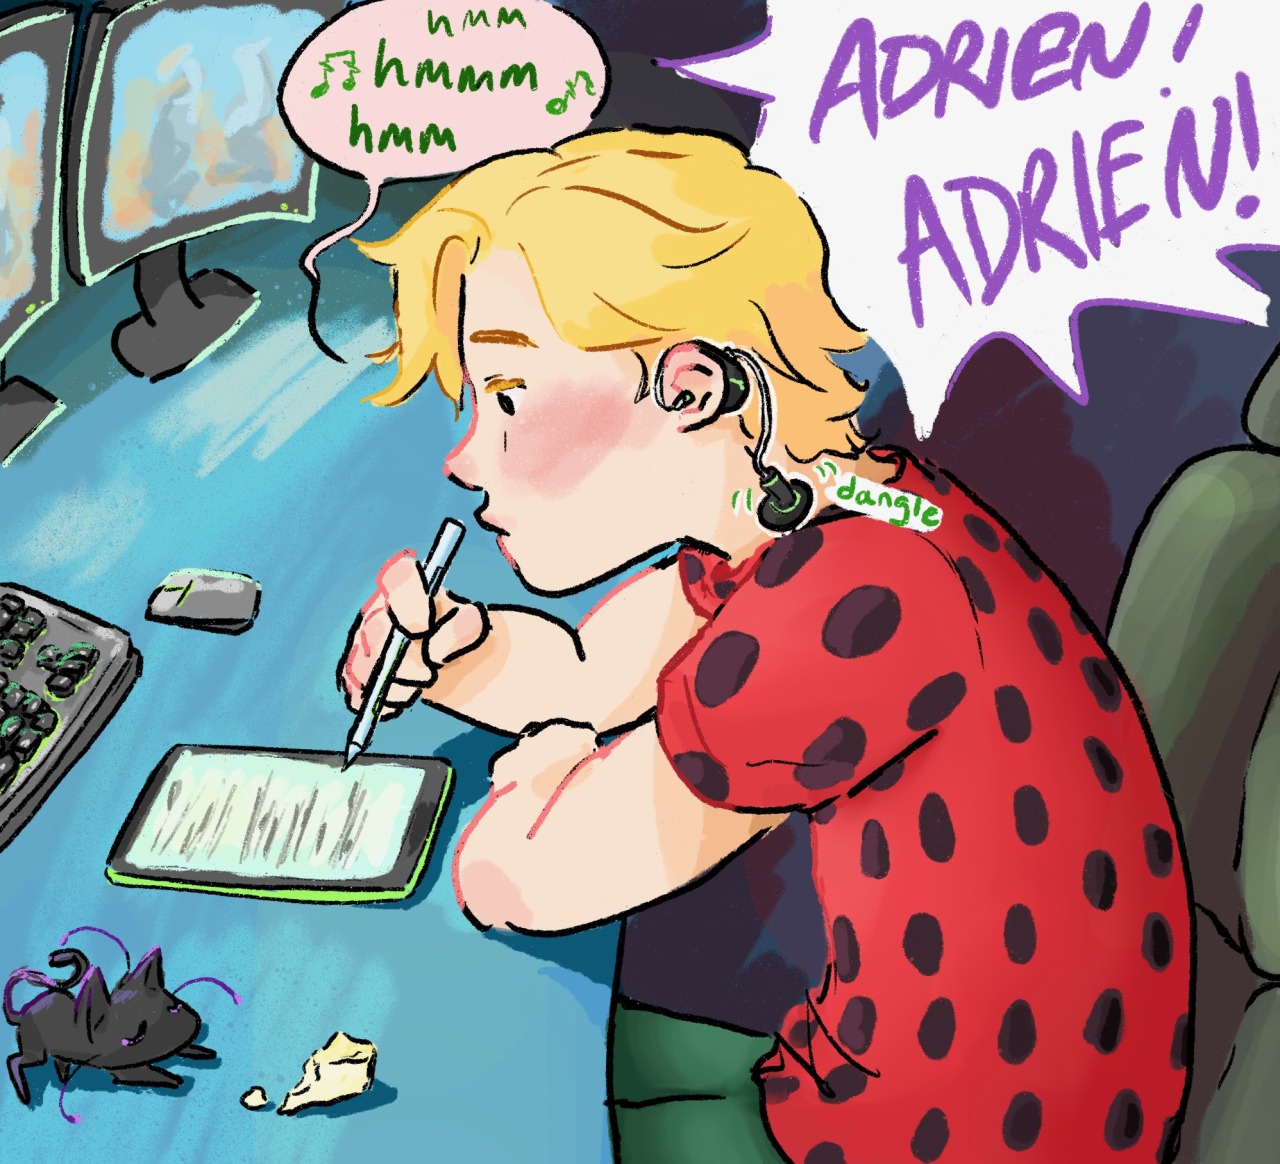 wehadabondingmoment:
“themaxmess:
“no one needs to hear all the time … give the boy a break!
”
“ID: Adrien Agreste is sitting at his desk, writing on his ipad while humming a melody. Plagg is sleeping next to him on the desk, partly eaten cheese in...